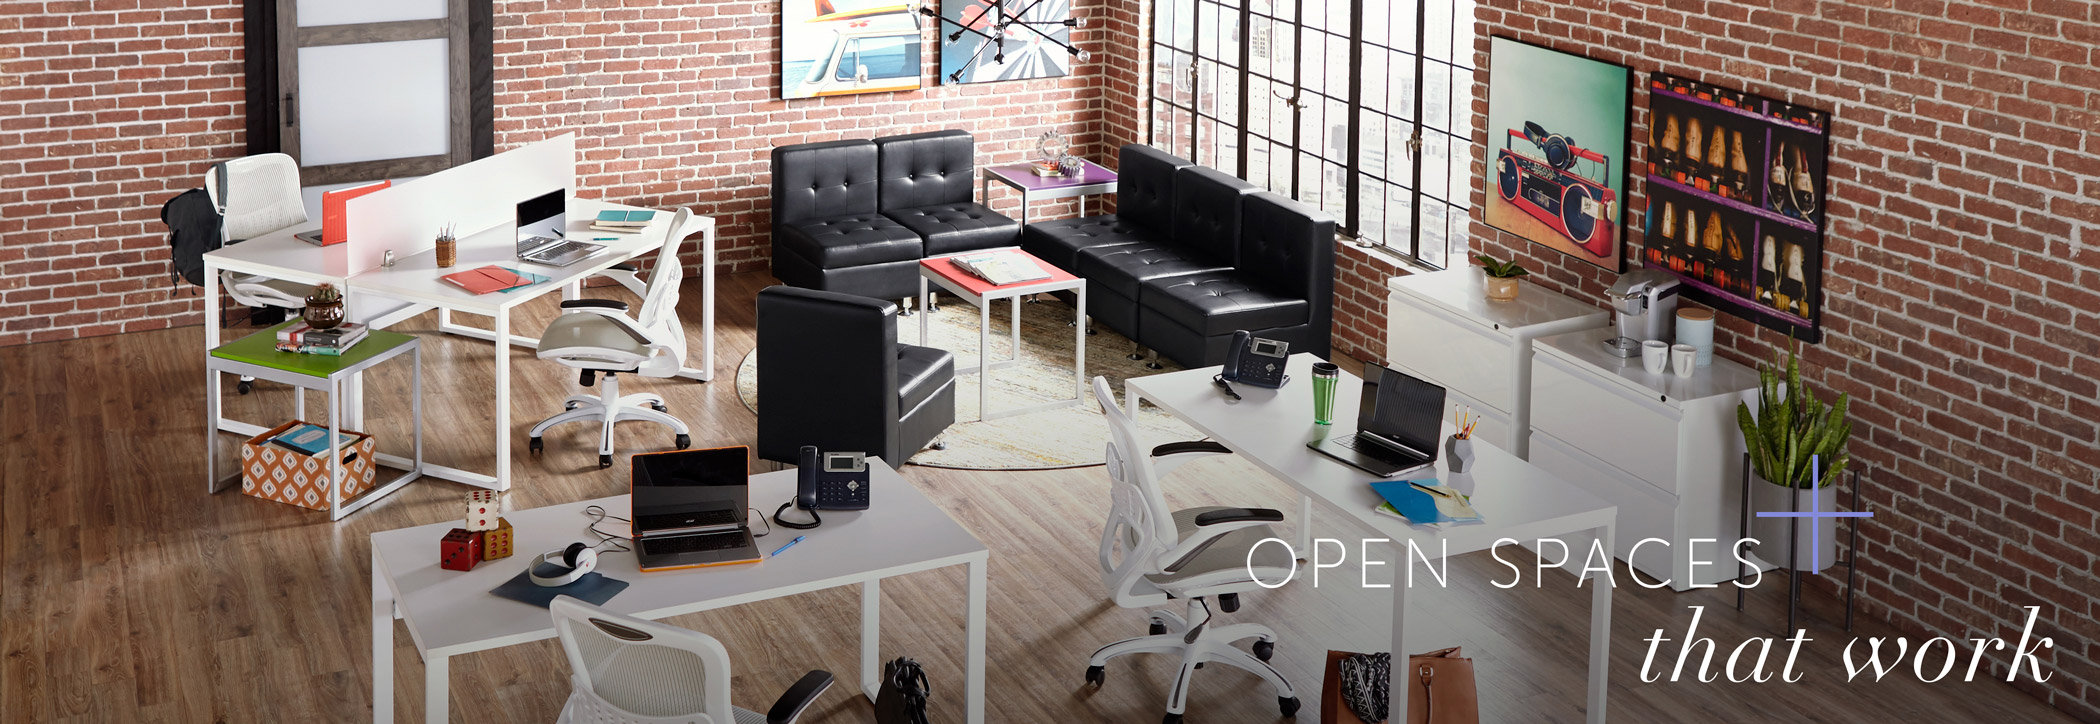 Open office space with rented furniture with words ‘open spaces that work’